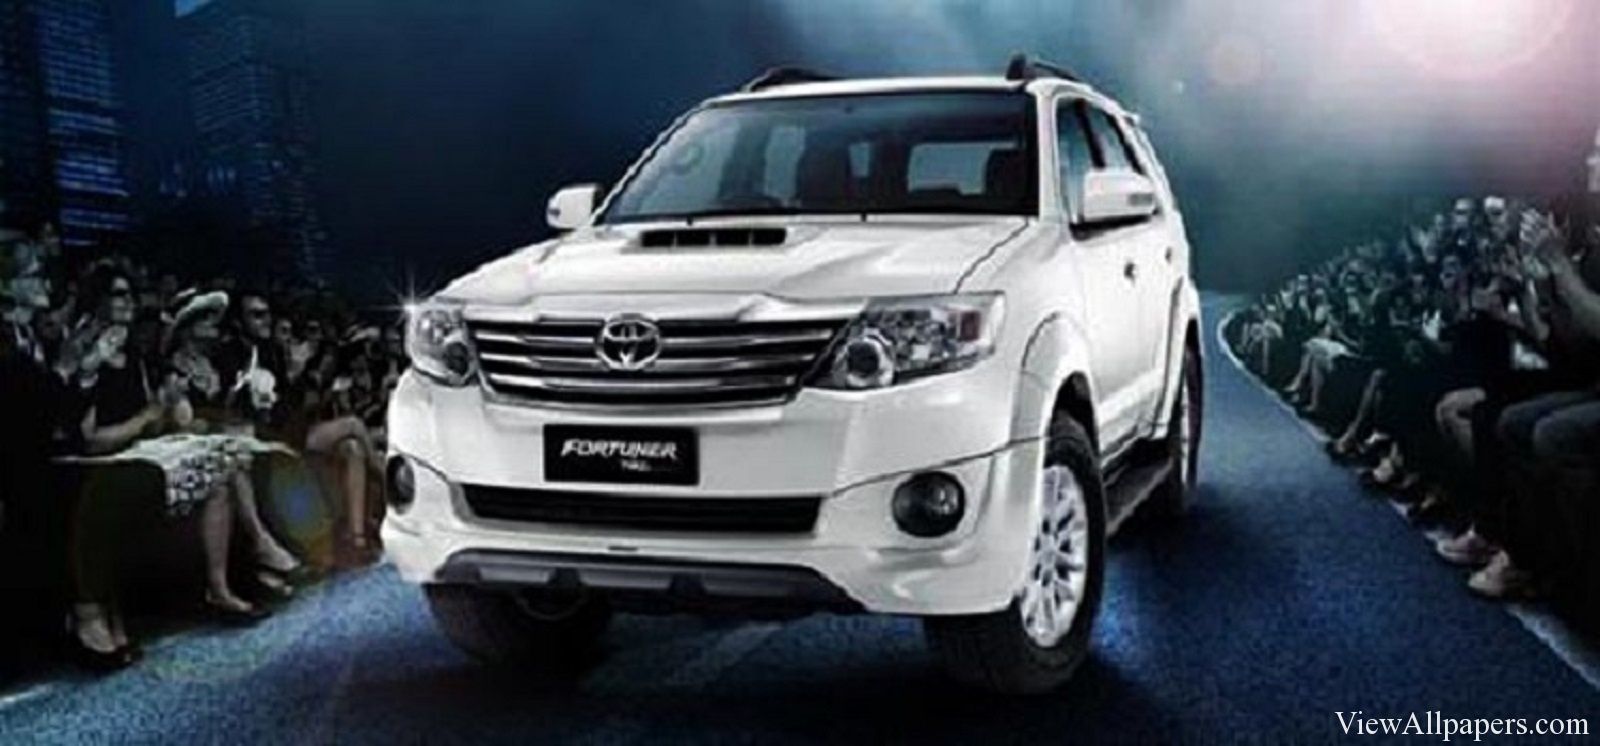 Toyota Fortuner HD Walpaper on Windows PC Download Free  30  toyota fortuner